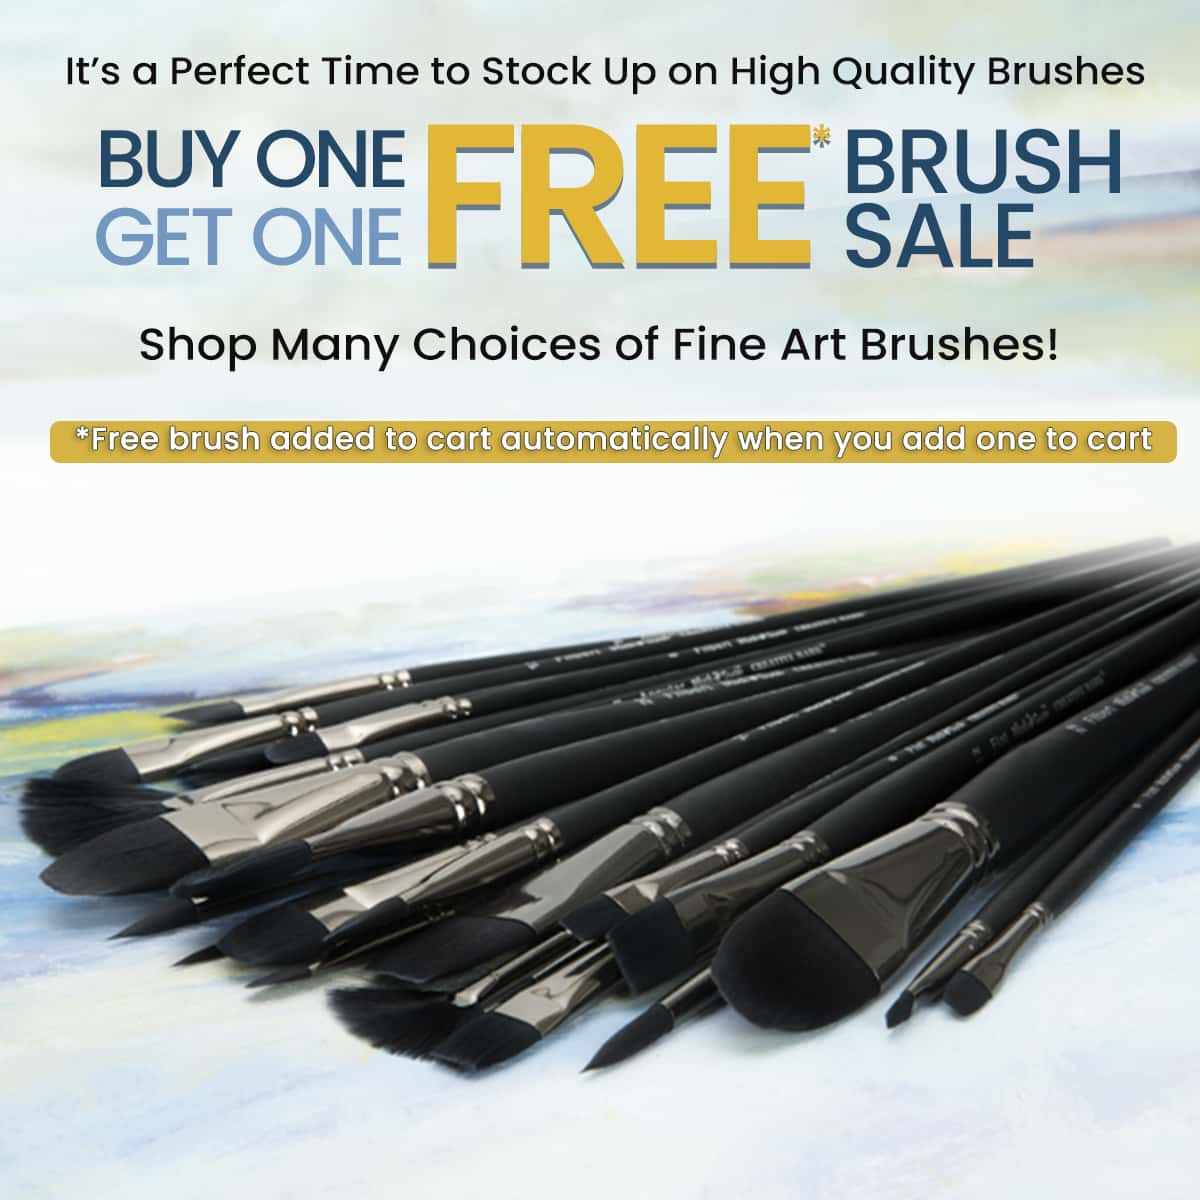 Buy One Get One Free Limited Time Brush Sale